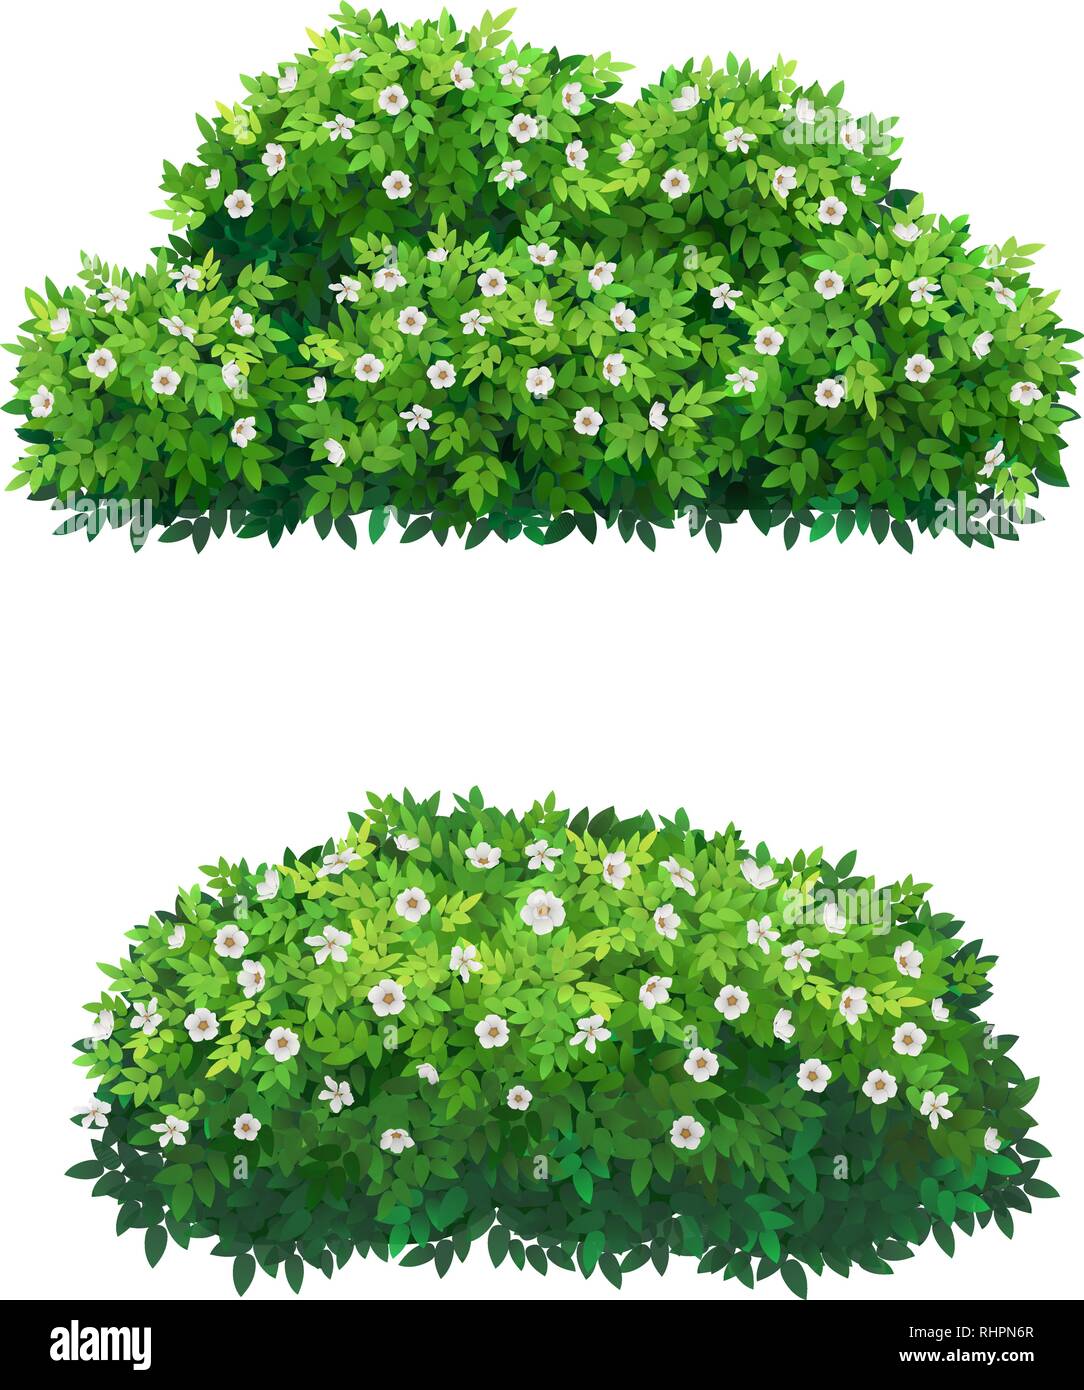 Green bushes and tree crown with white flowers. Stock Vector